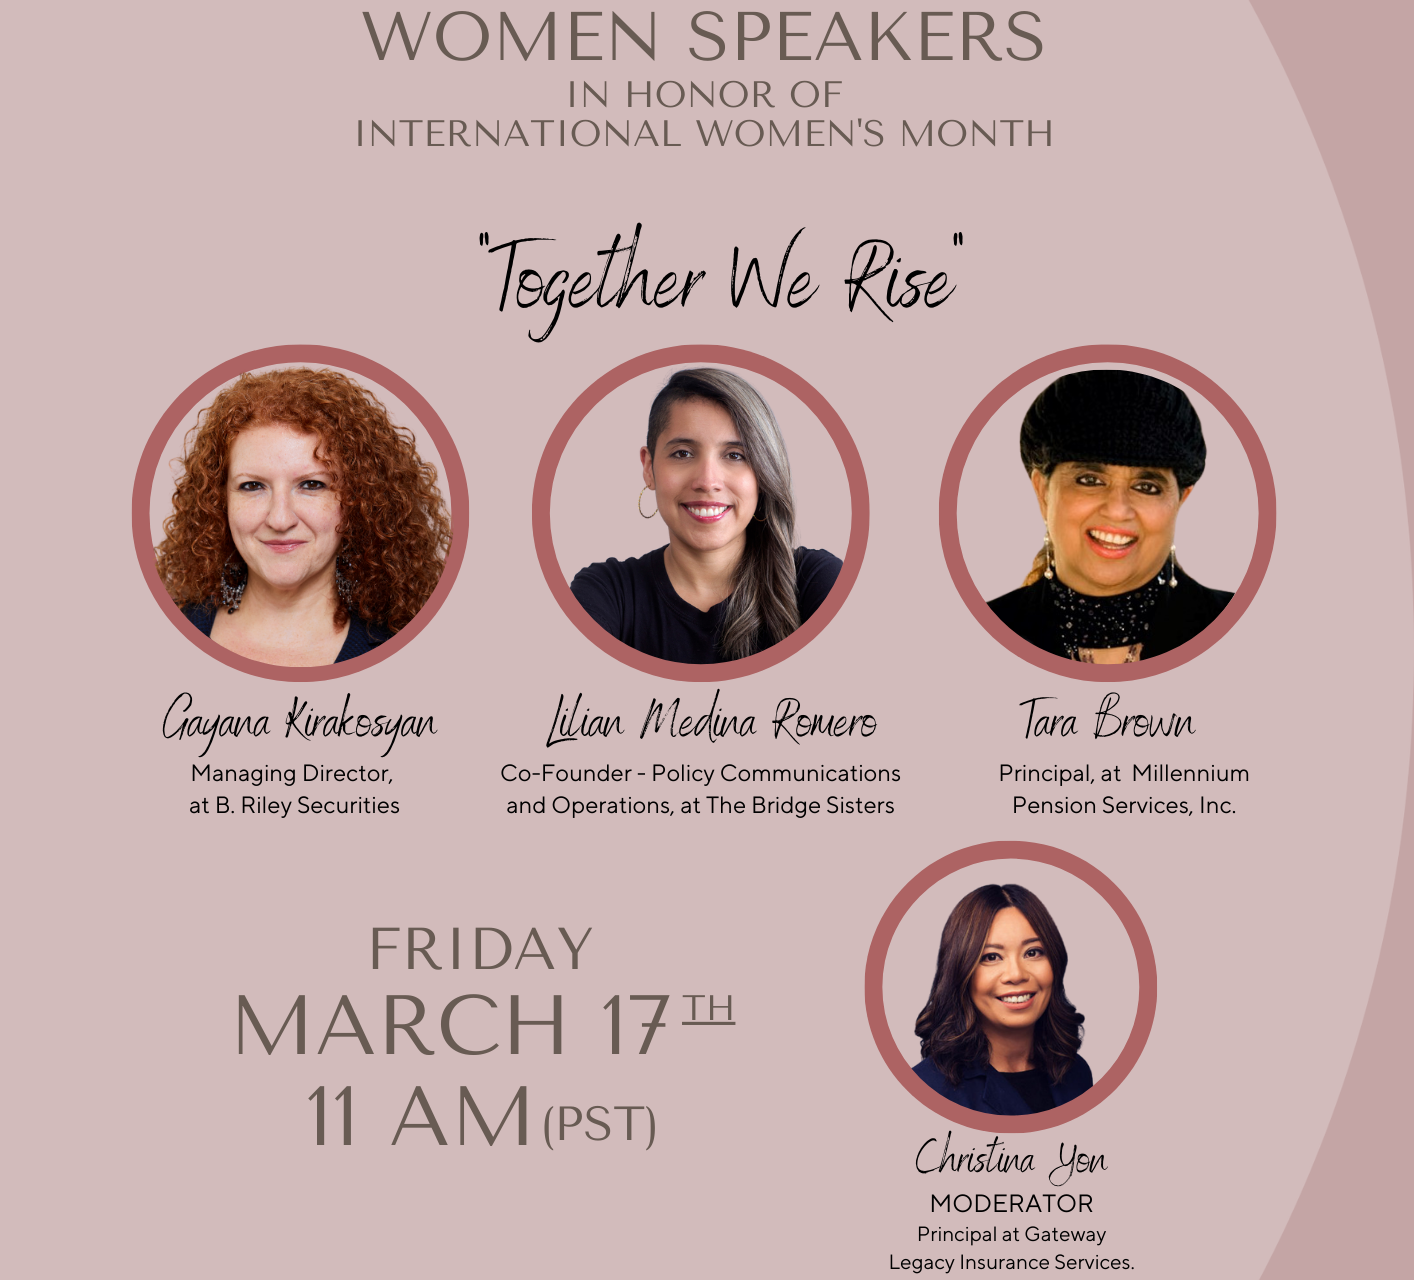 Multicultural Professionals Monthly Gathering – March 17th at 11am (PST)